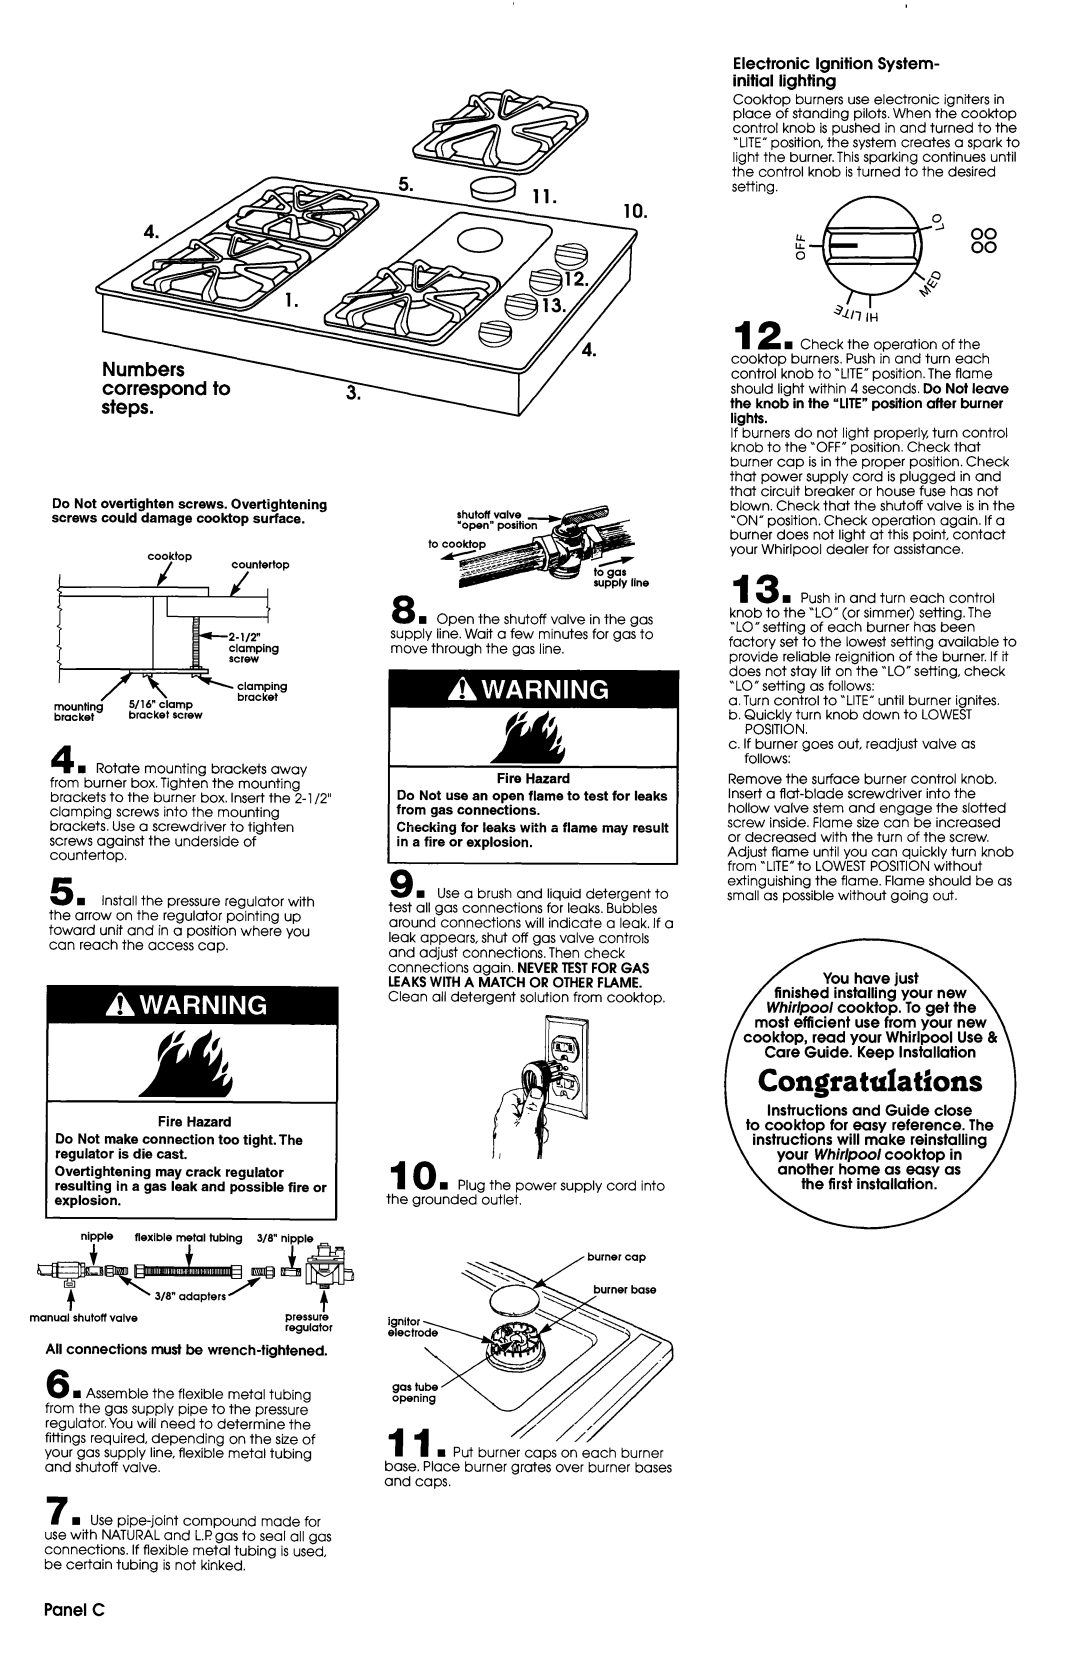 Whirlpool SC864OED installation instructions correspond to steps, Congratulations, Il 